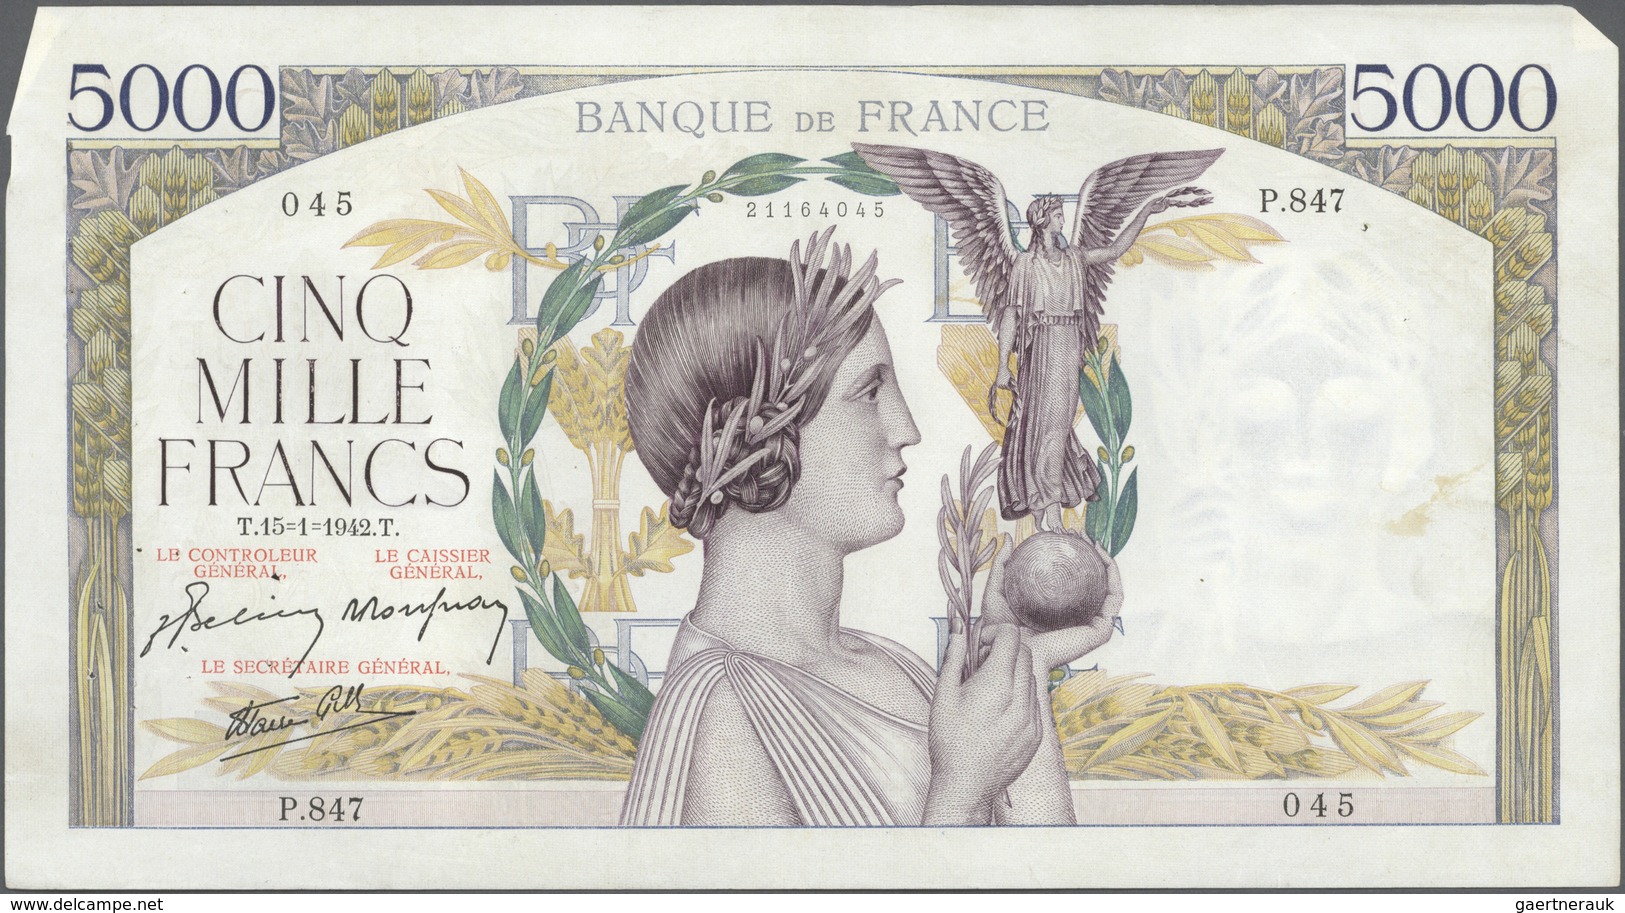 France / Frankreich: set of 22 notes 5000 Francs 1939-43 "Victoire" P. 97, all notes used with folds